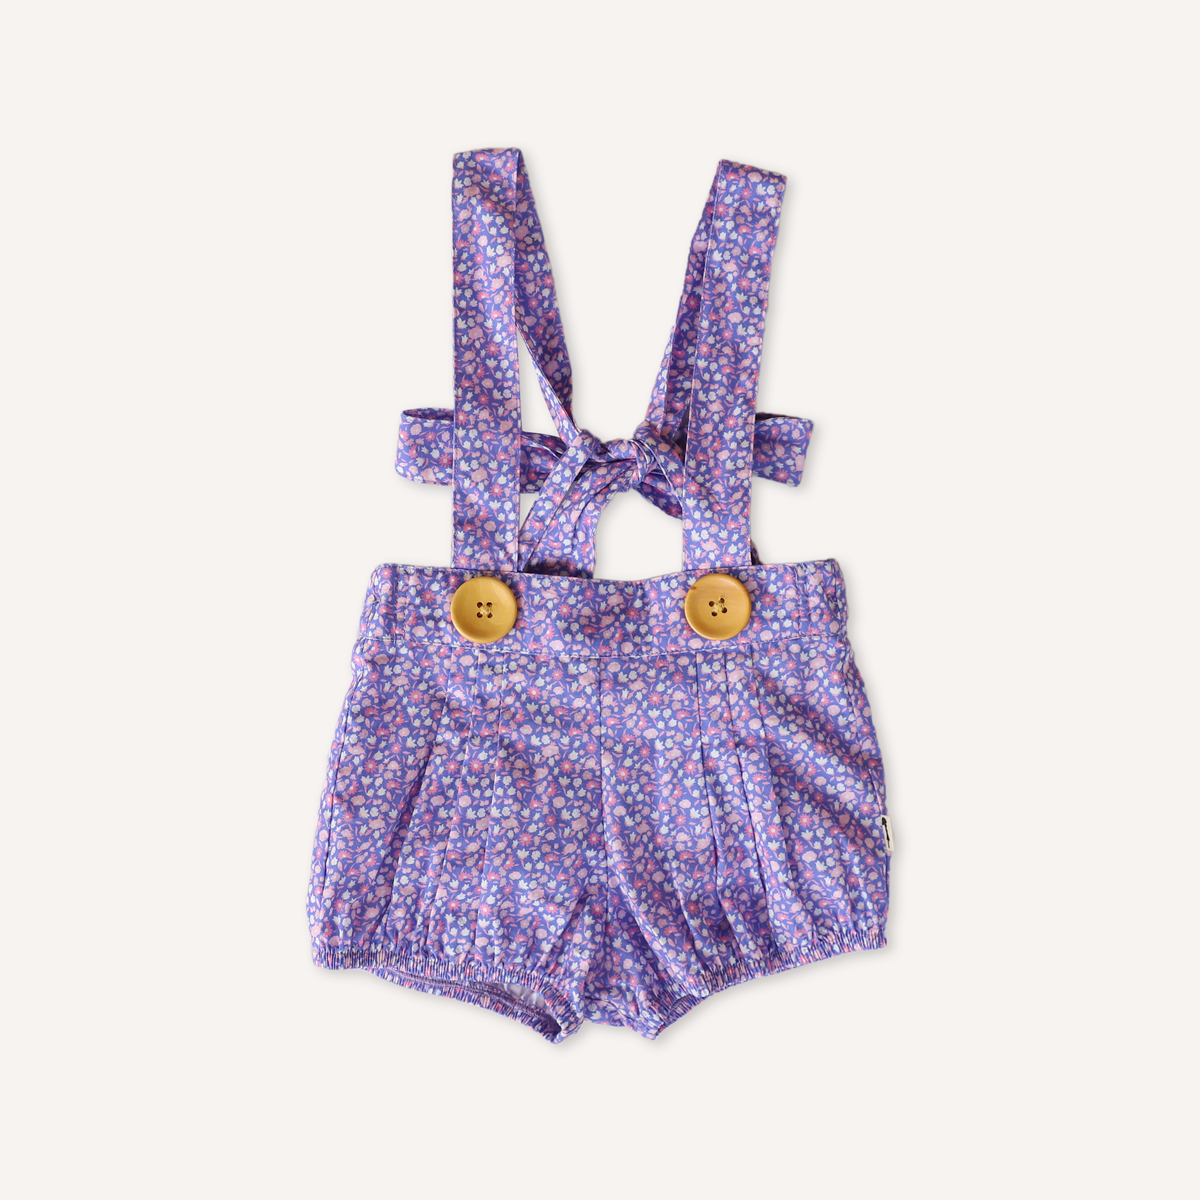 Lacey Lane Carly Suspender Bloomers | 30% OFF | Size 000, 00 | Children of the Wild